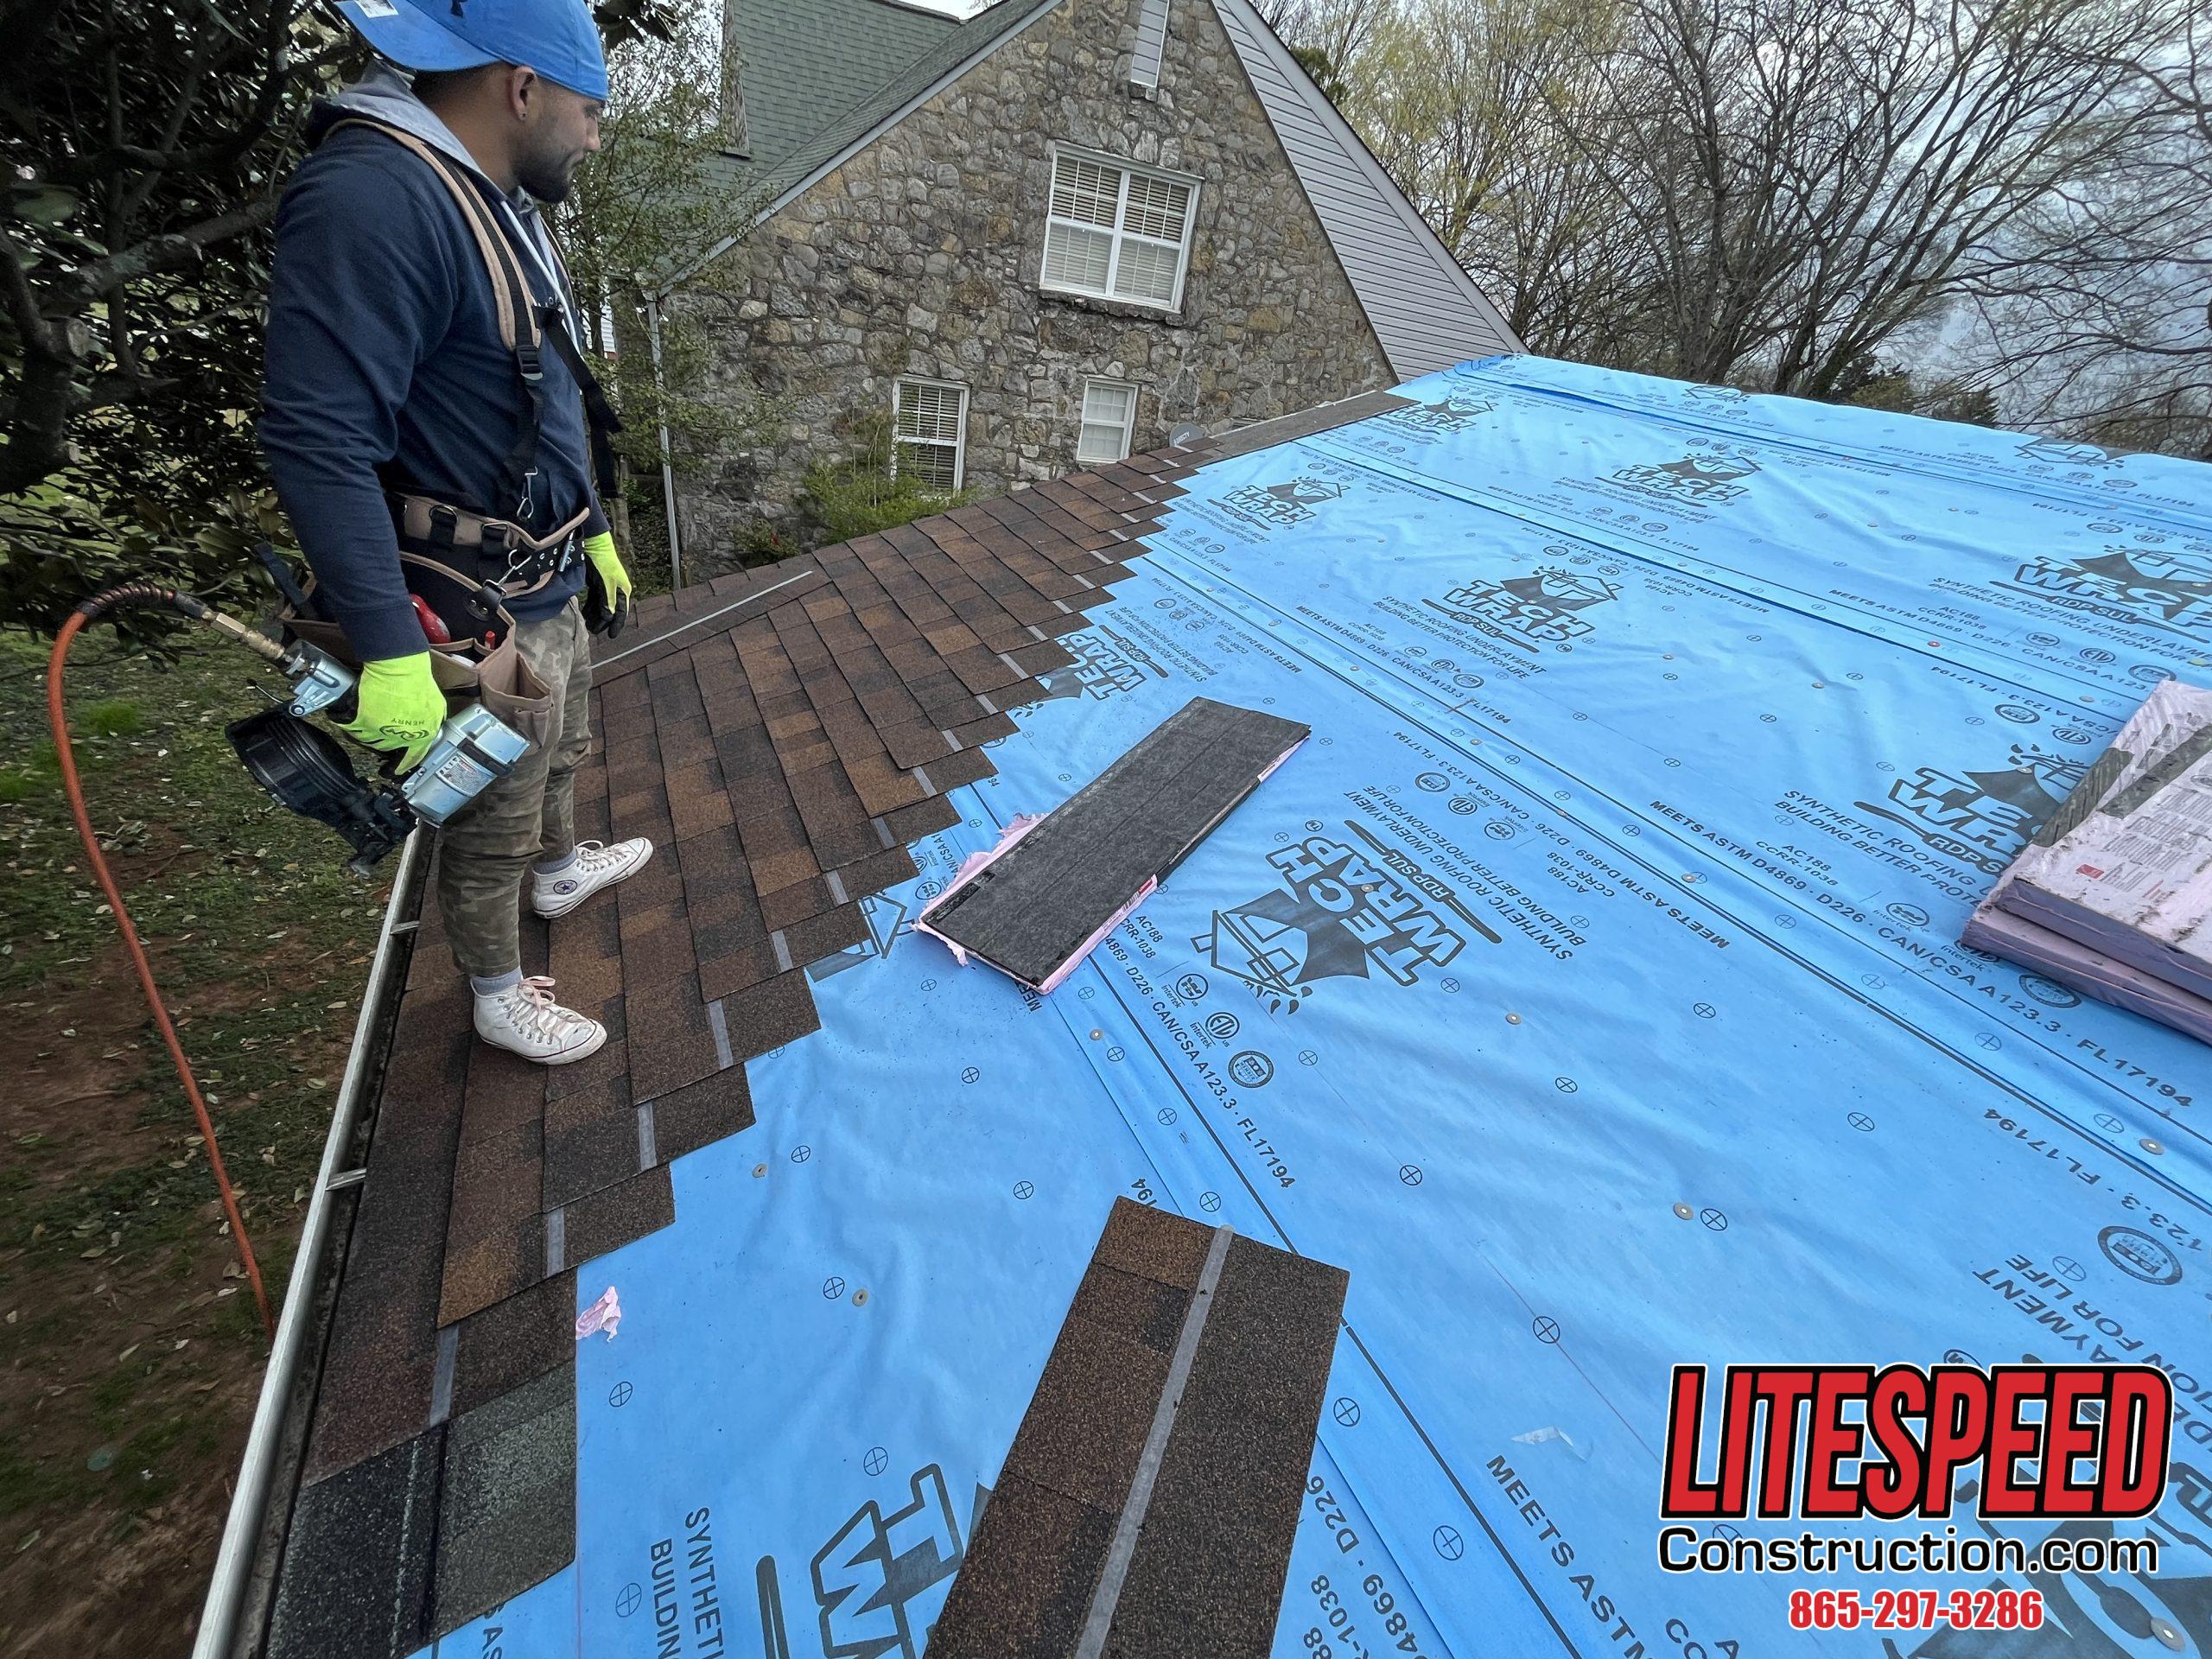 This is a picture of brown shingles being installed on a roof